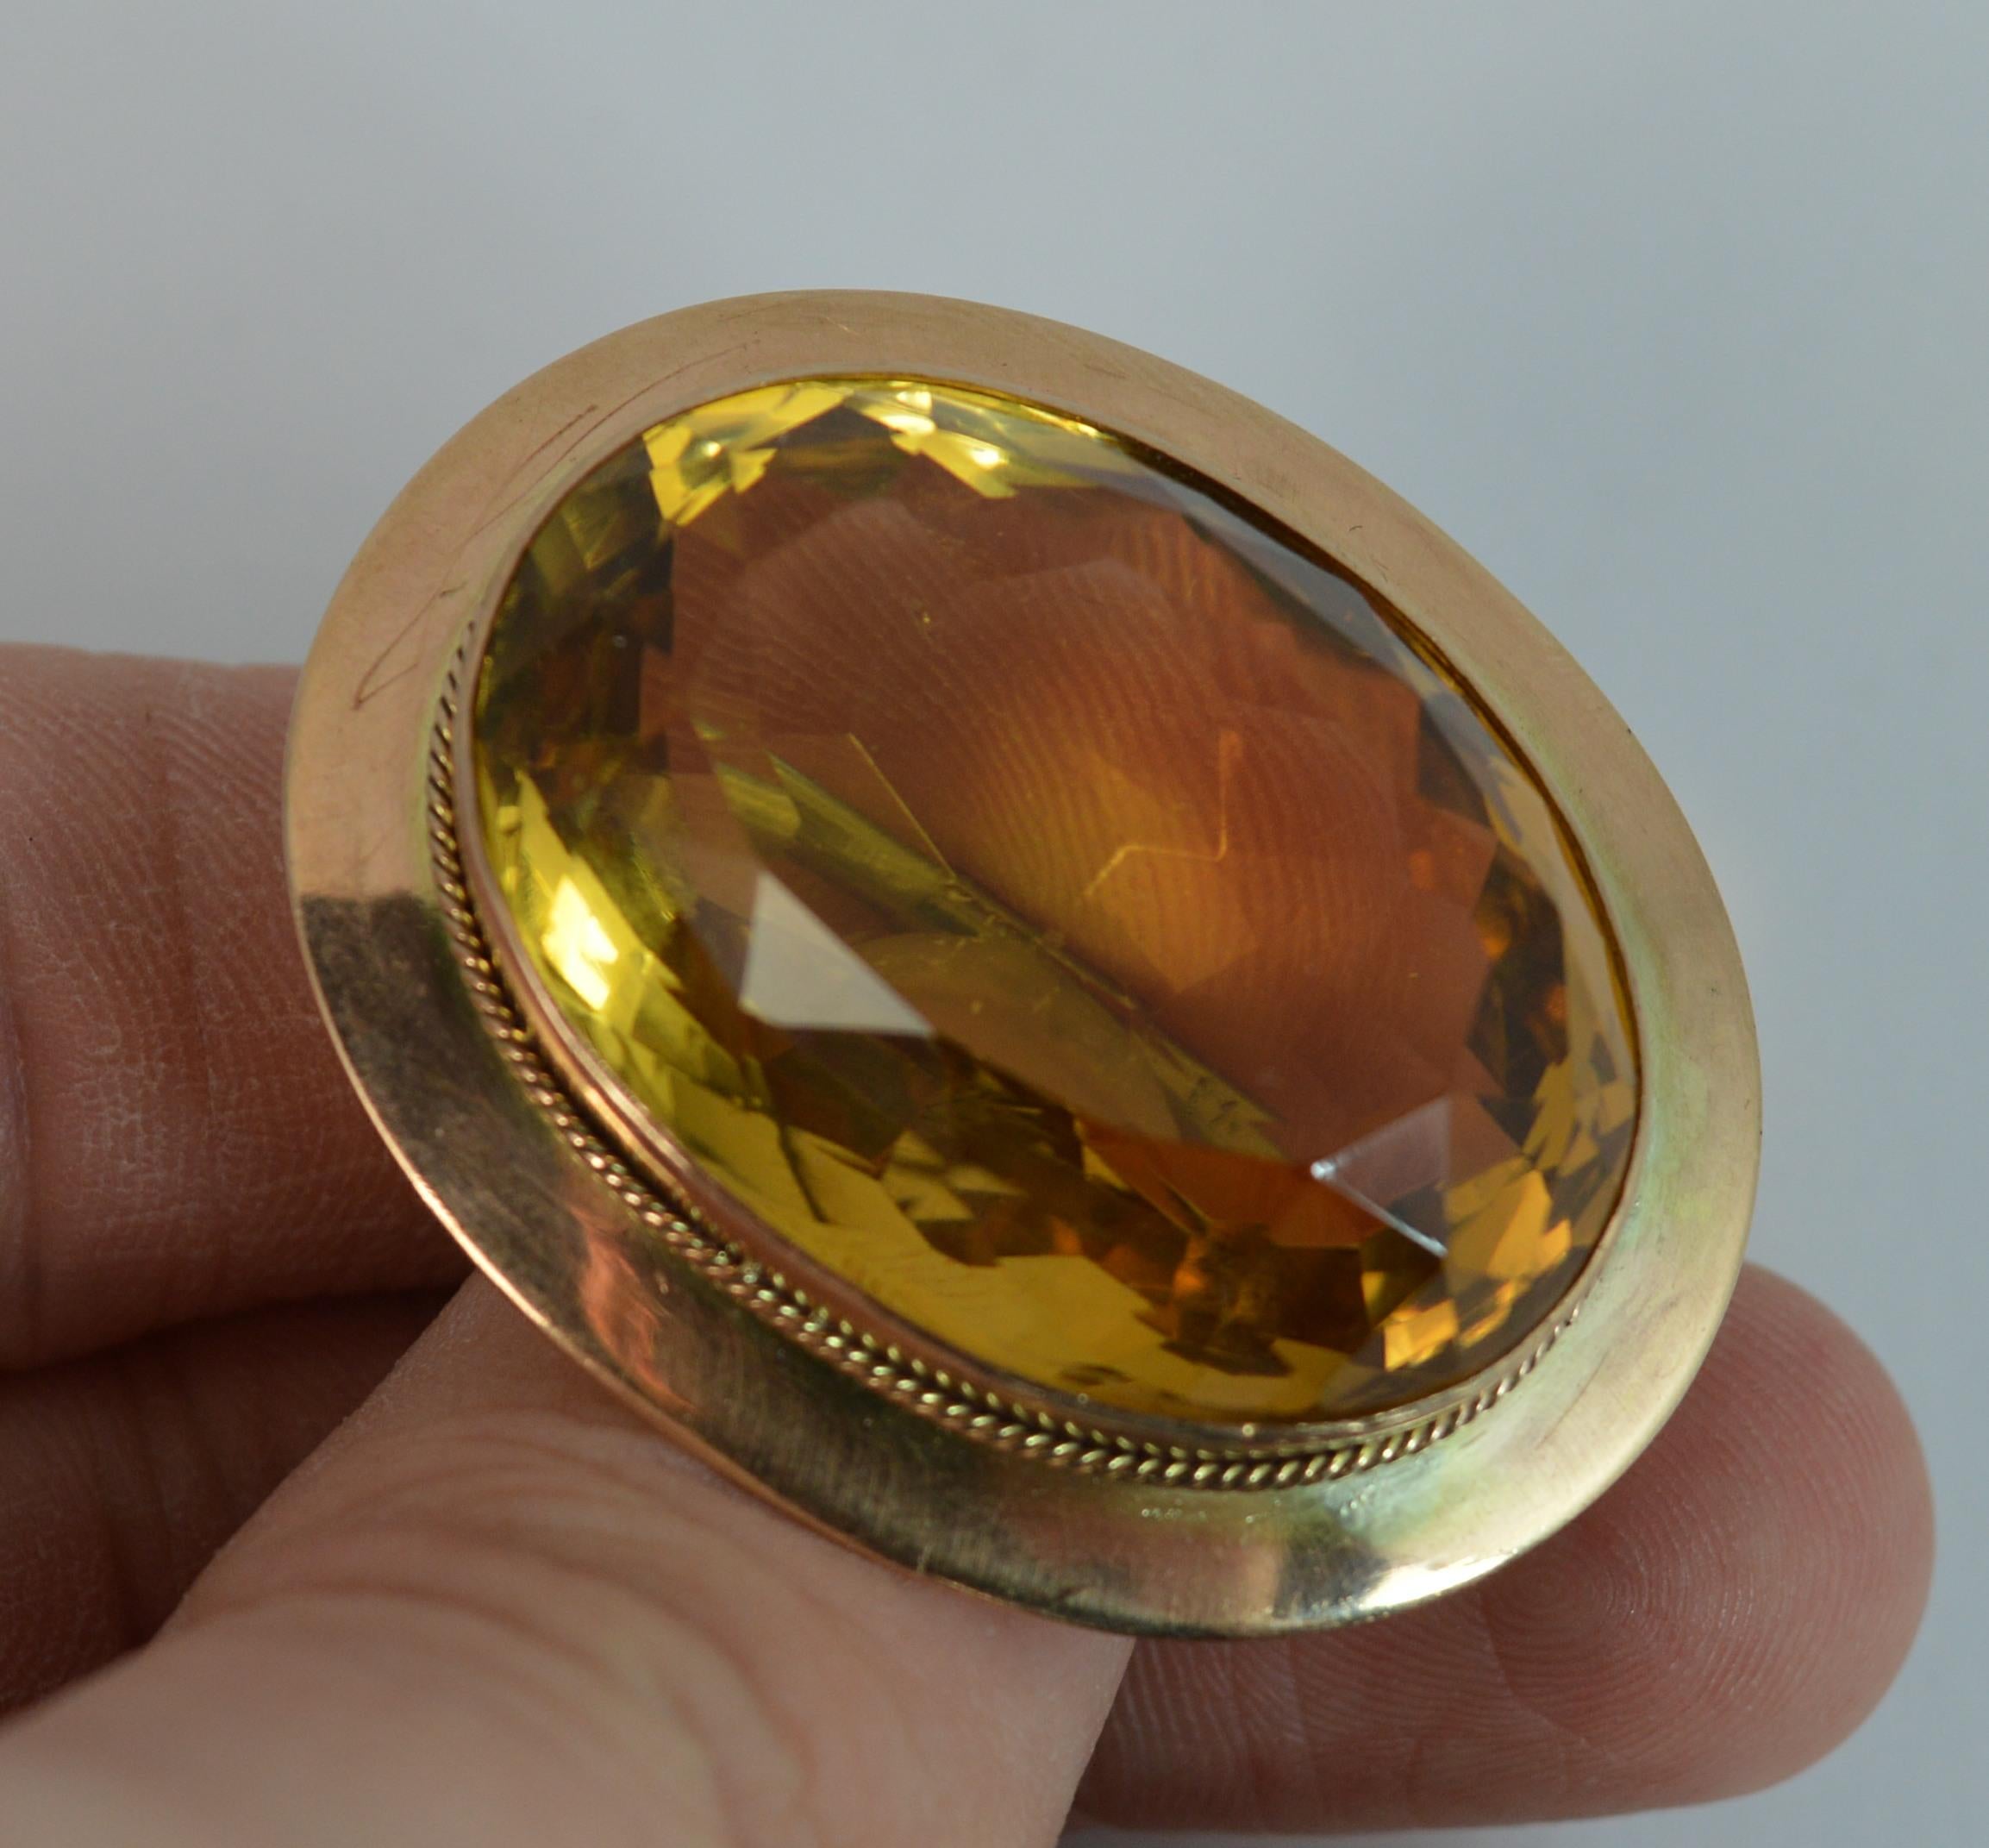 A stunning Citrine and 9ct Gold statement piece.
Large oval cut natural citrine, 23mm x 30mm approx, 48 carats.
Surrounded by a plain 9 carat rose gold border.

CONDITION ; Very good for age. Crisp design. Well set stone. Working pin. Issue free.